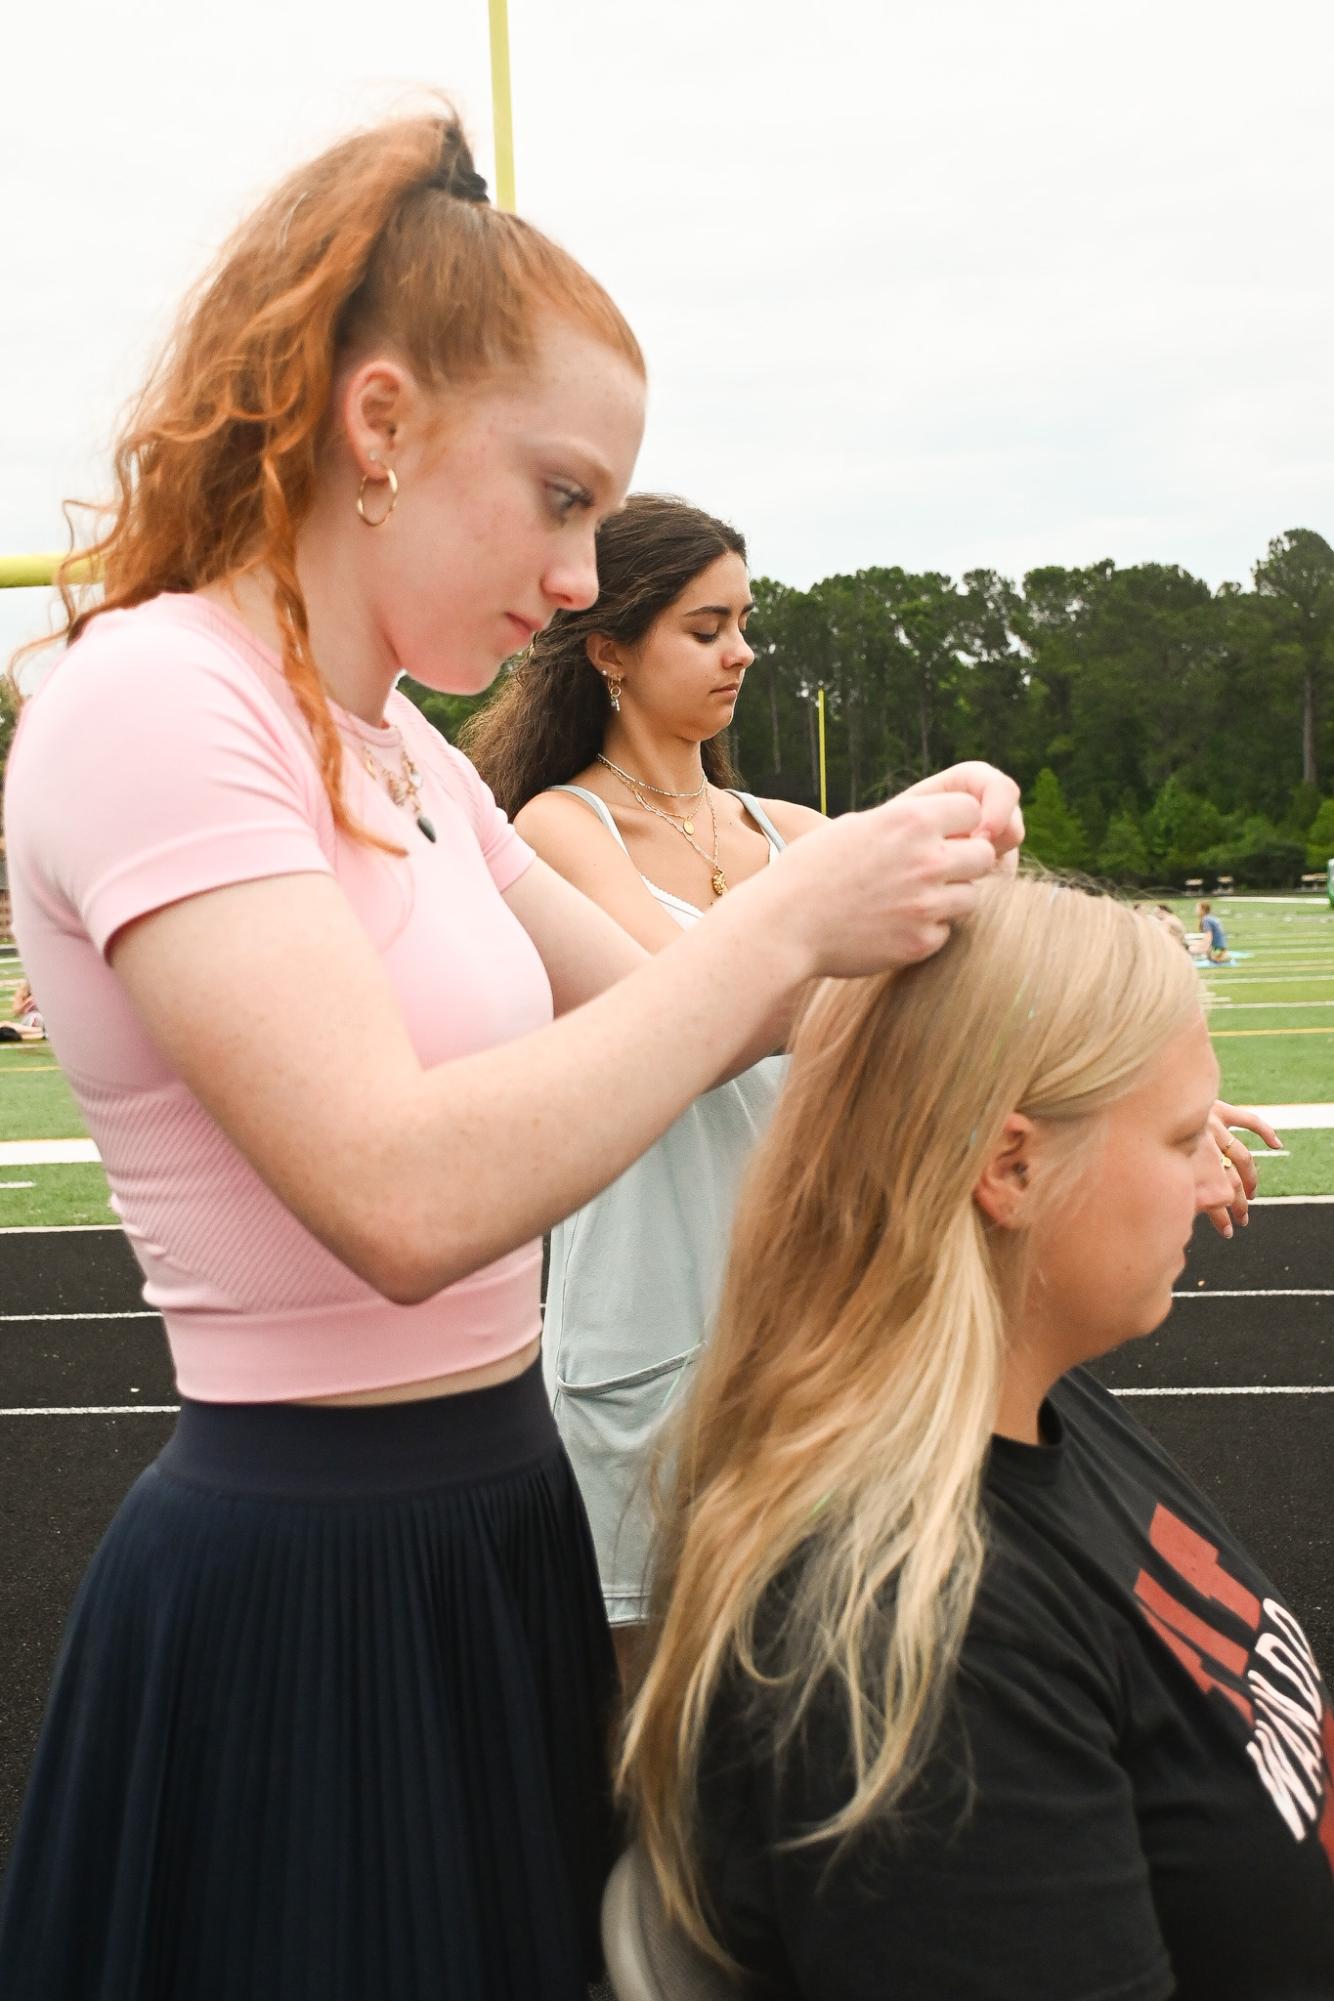 Student Council spirit chair Kelsey Miller puts fairy braids into teacher
Cori Jarotski’s hair. Fairy hair braids were available throughout the event
for participants, provided by Student Council.